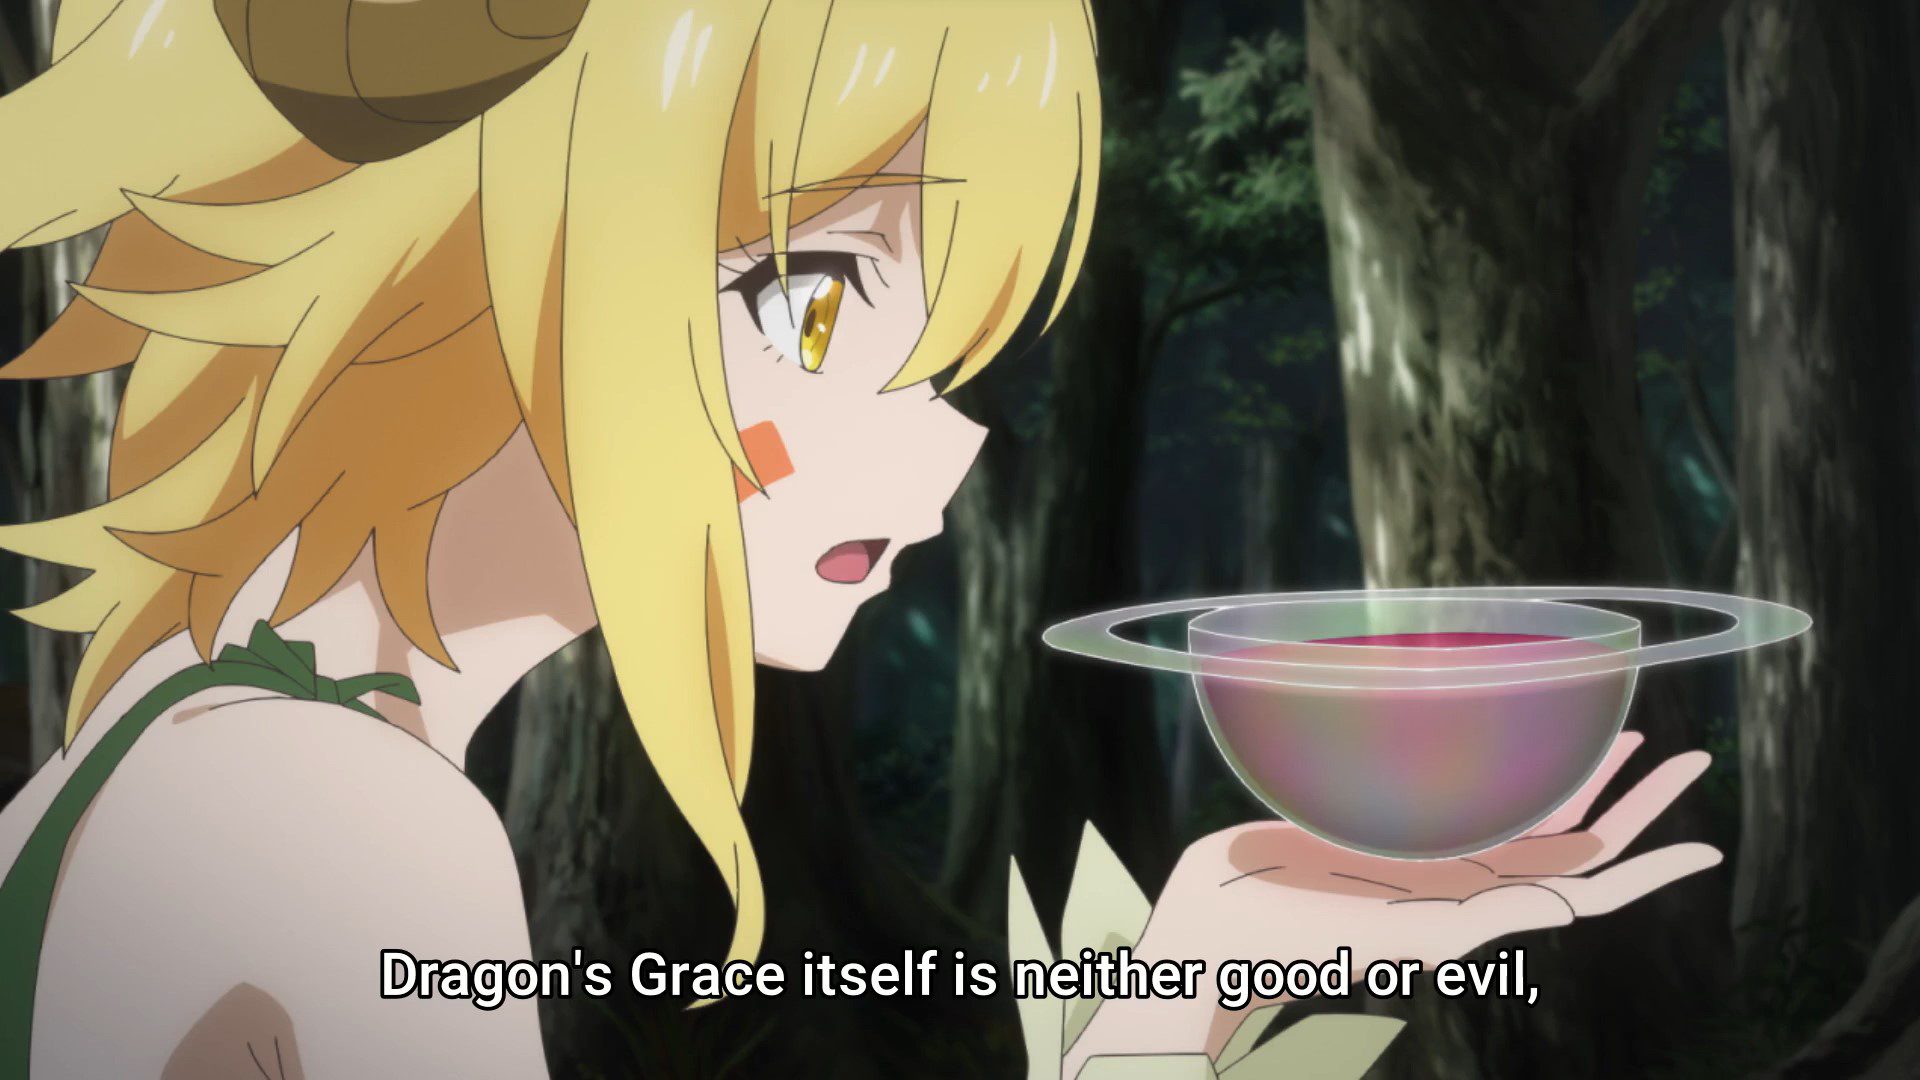 My Isekai Life I Gained A Second Class And Become The Strongest Sage In The World Episode 4 Recap